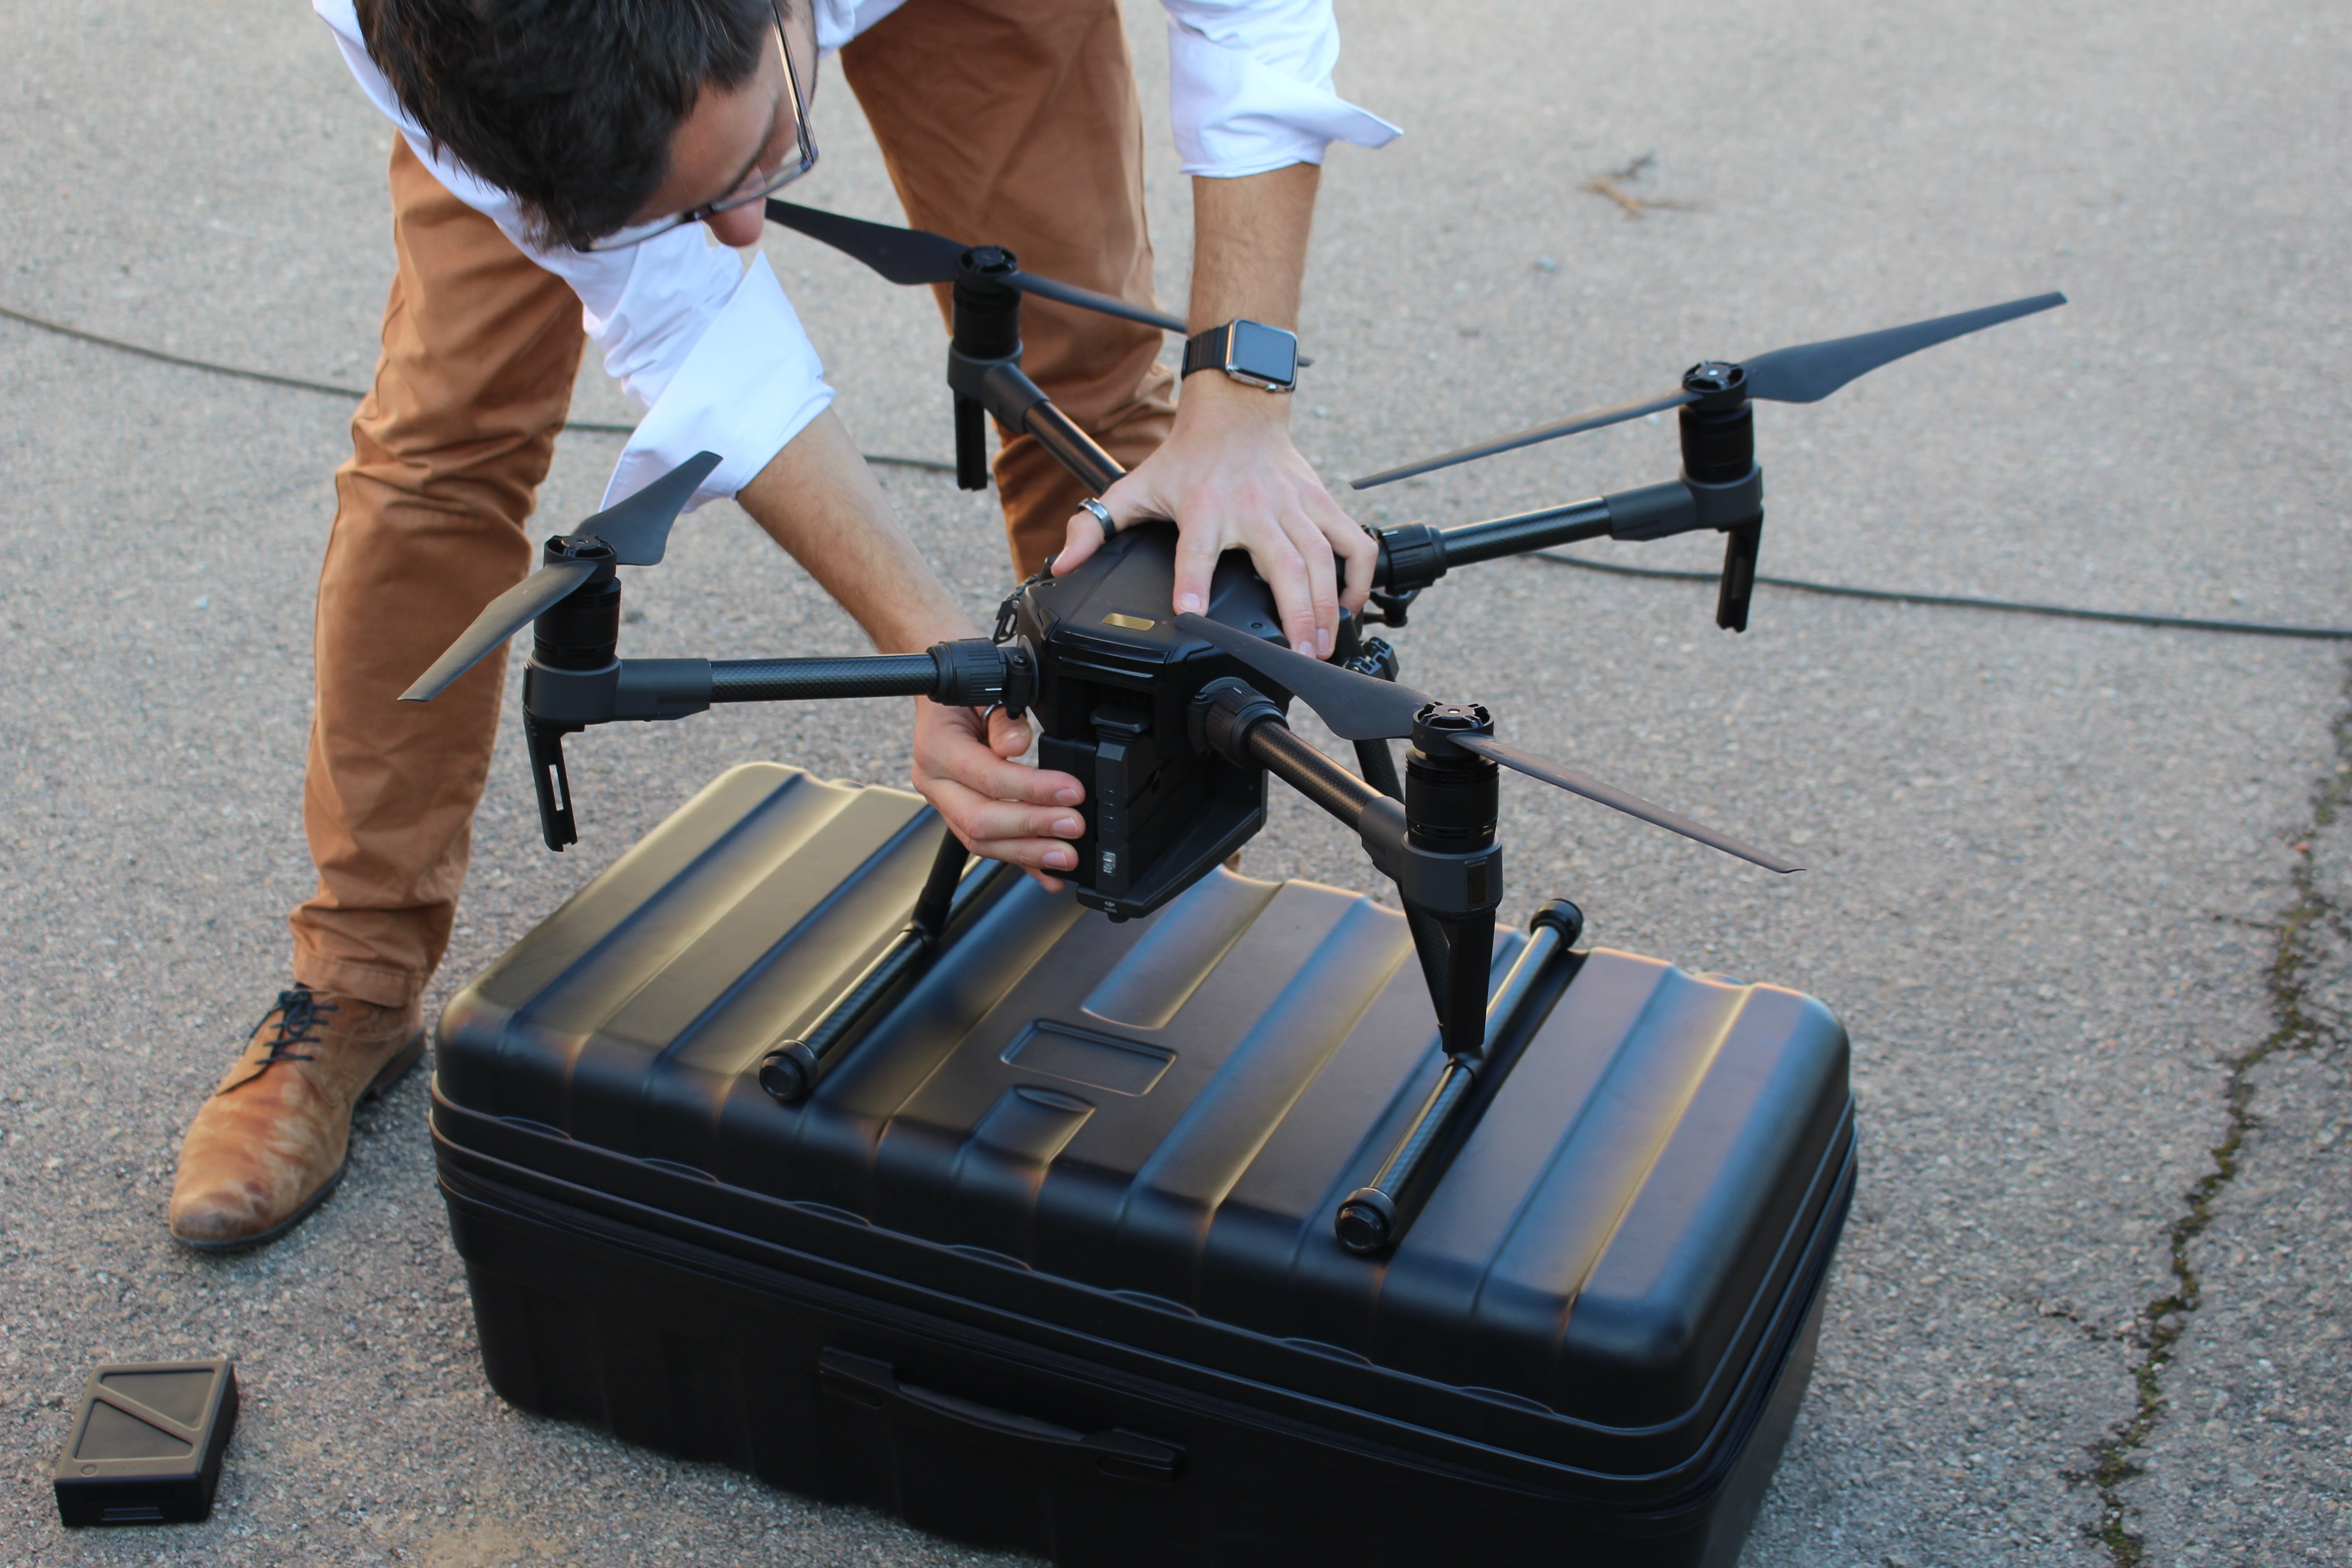 rugged Matrice series drones go no drone has before | PCWorld